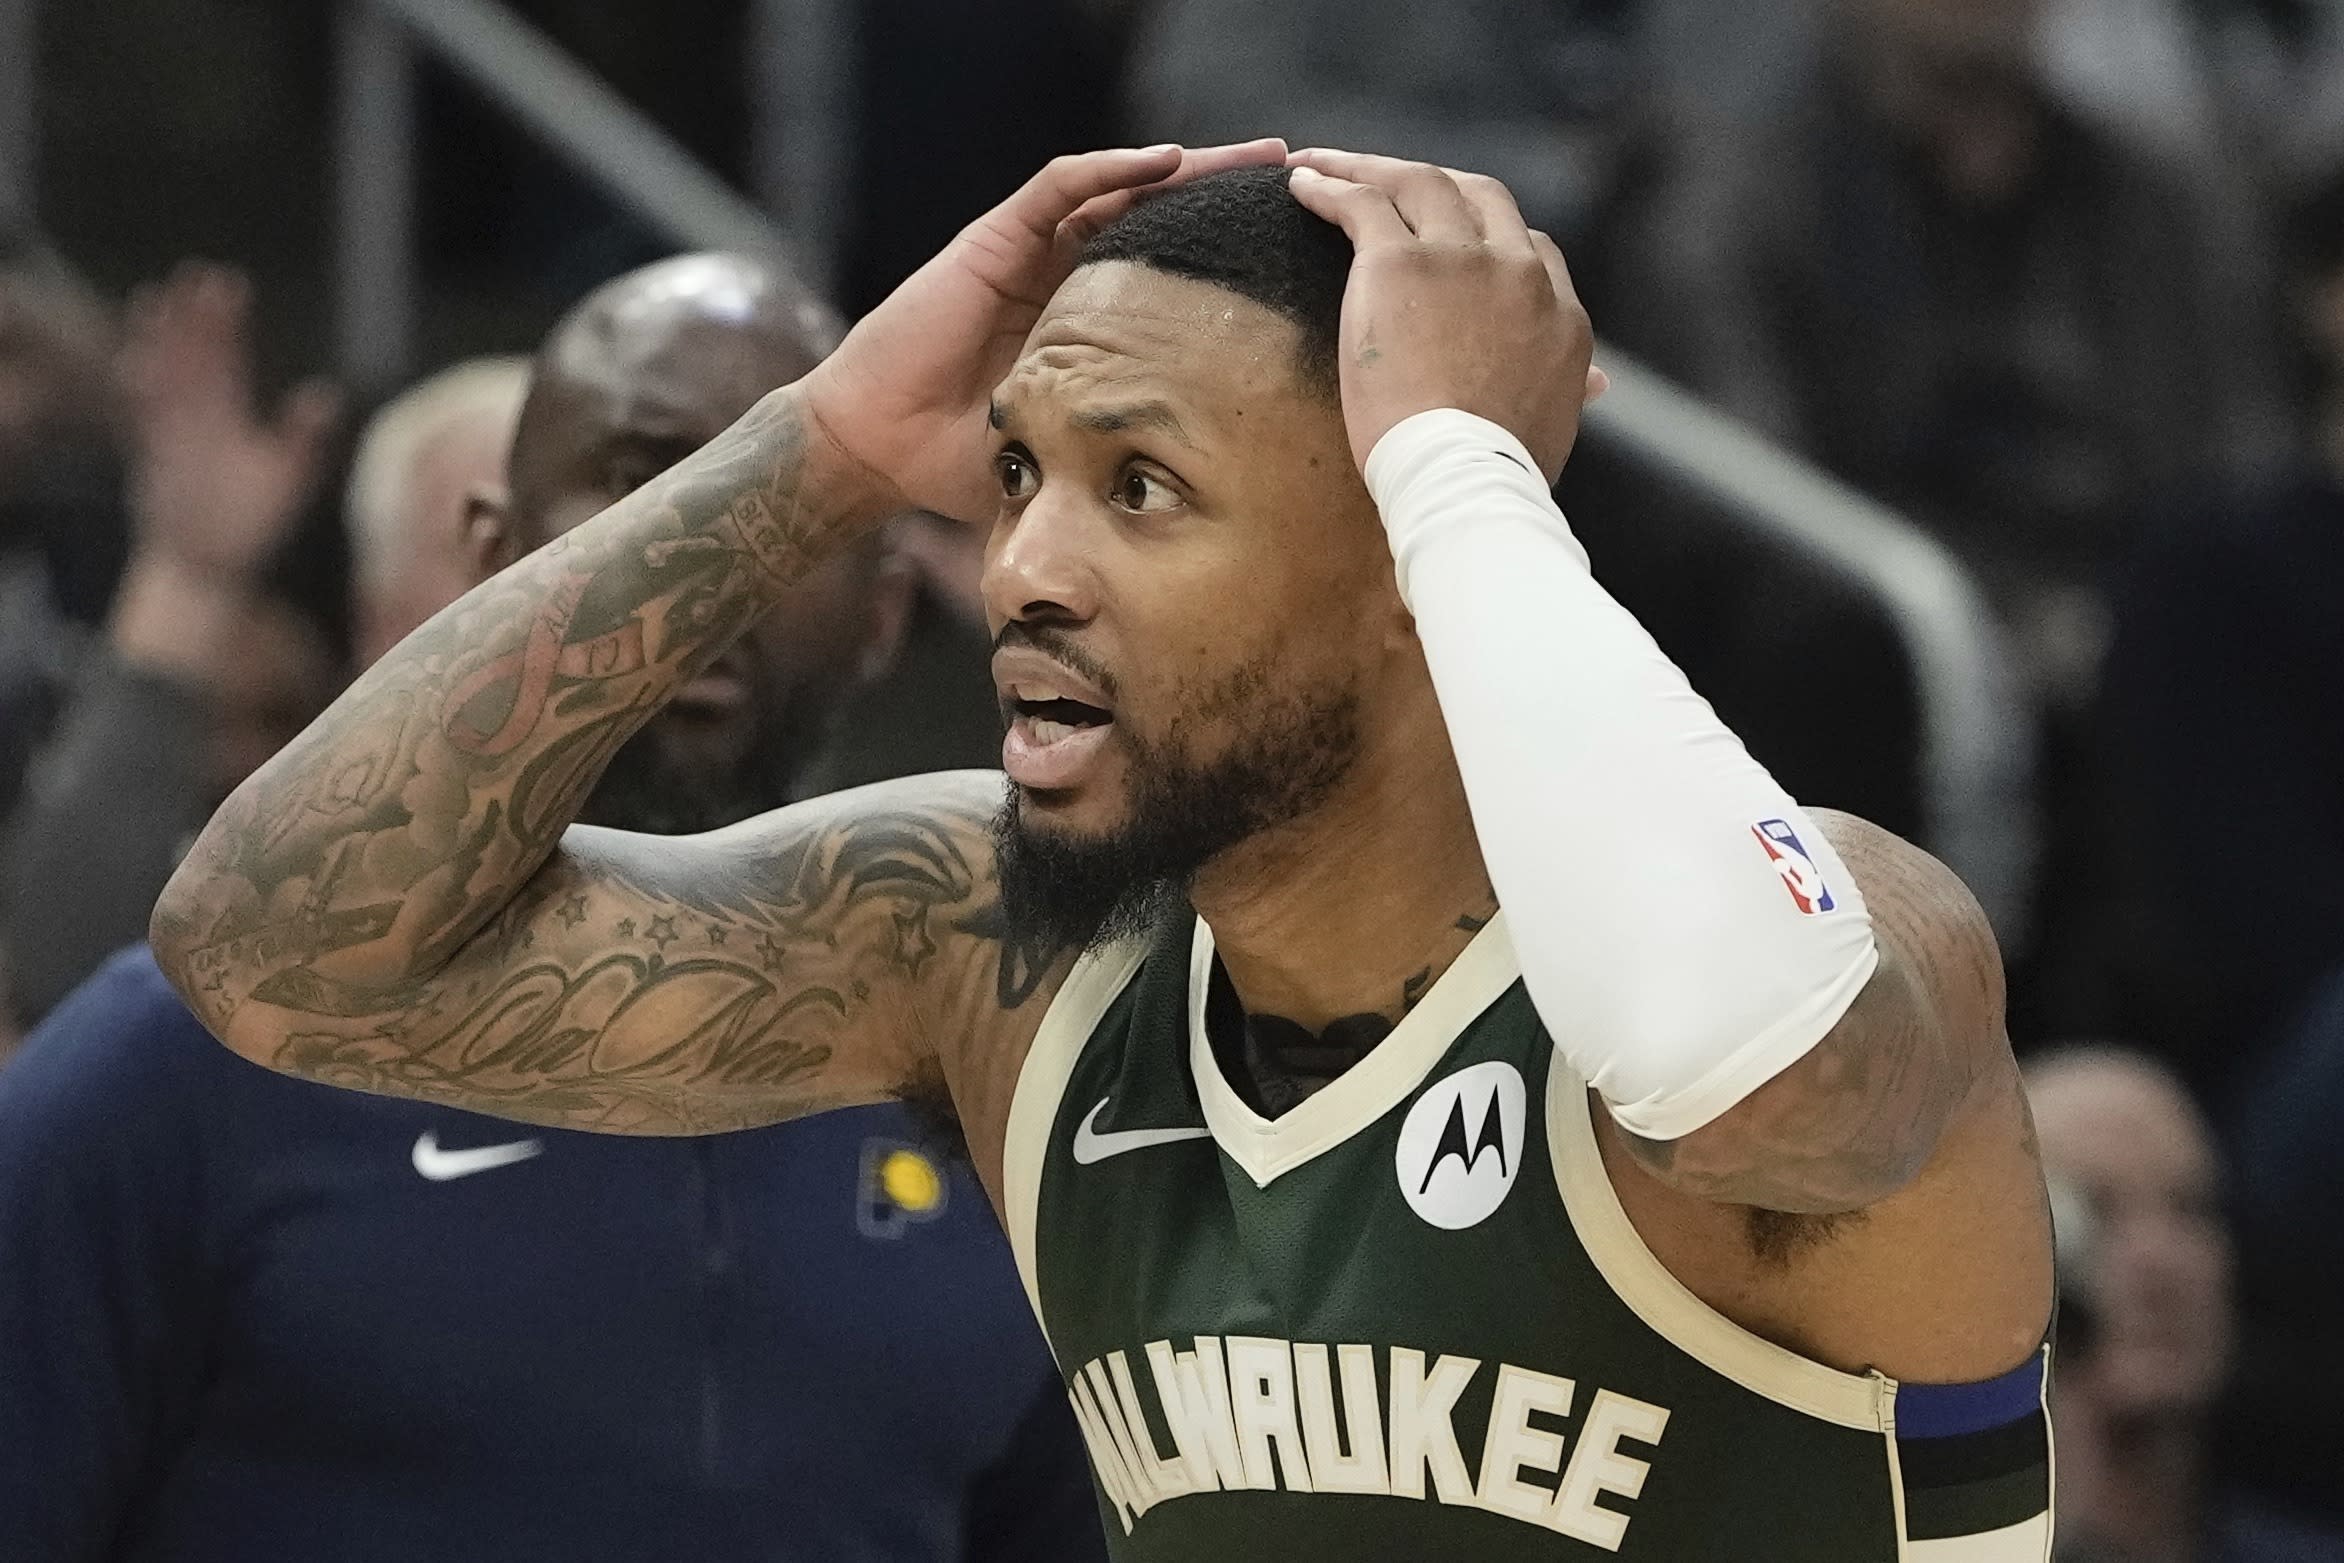 Report: Damian Lillard has strained Achilles, is doubtful for Game 4 of Bucks-Pacers NBA playoff series